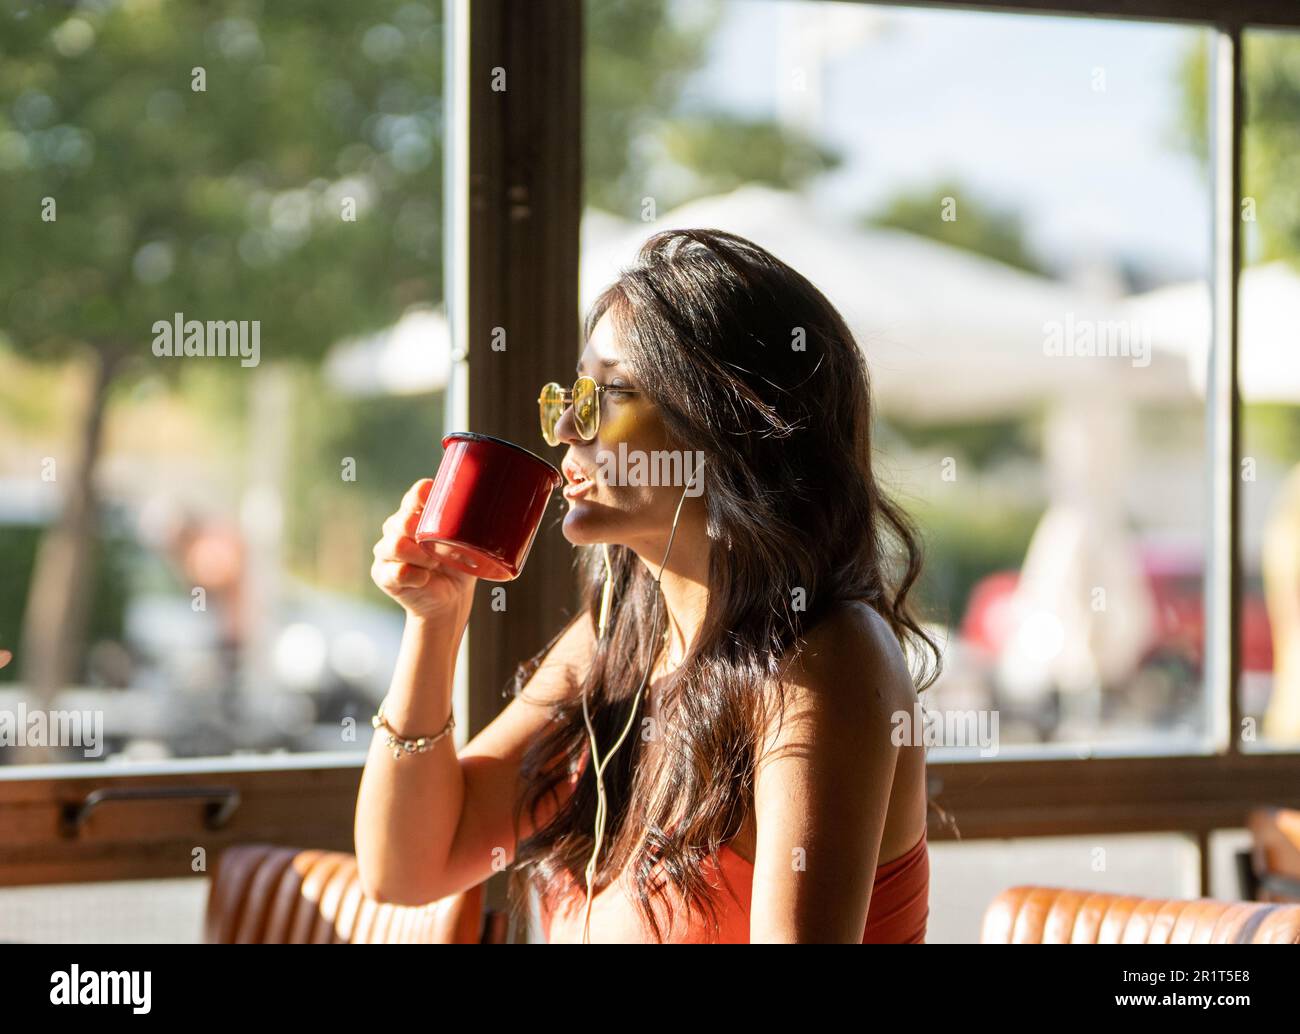 Woman in sunglasses drinking a cup of coffee while relaxing listening music with headphones in a coffee shop. Stock Photo